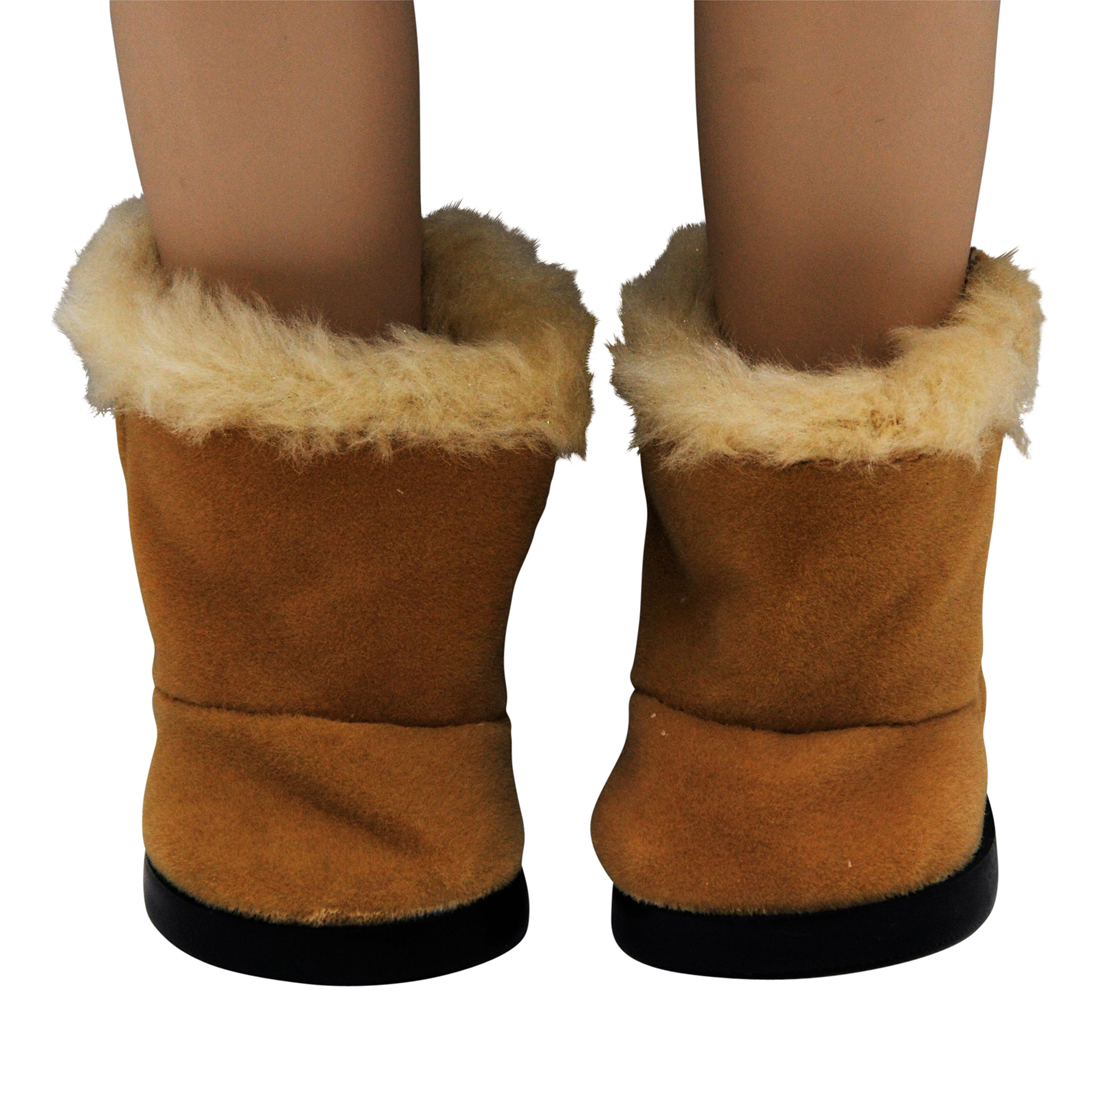 Brown Faux Suede Boots With Fur Fits American Girl Dolls and Other 18" Dolls 